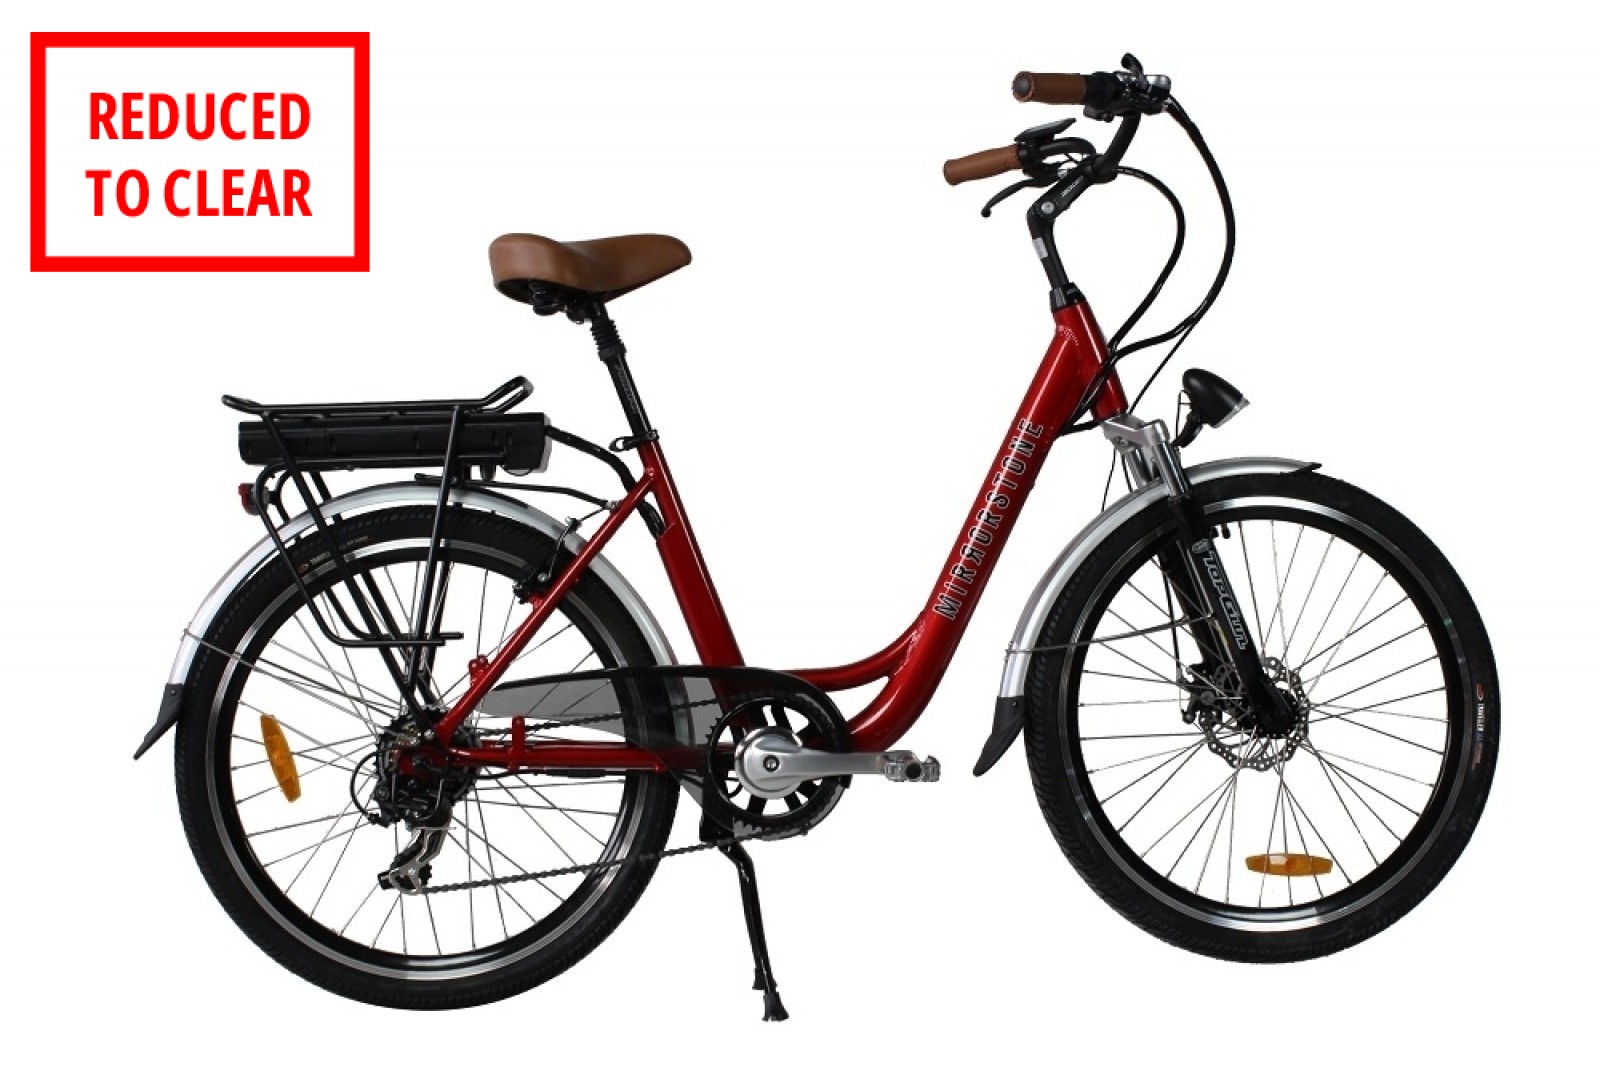 Sprint Cherry Red Electric Bike 24" Wheel Without Basket (Grade A)